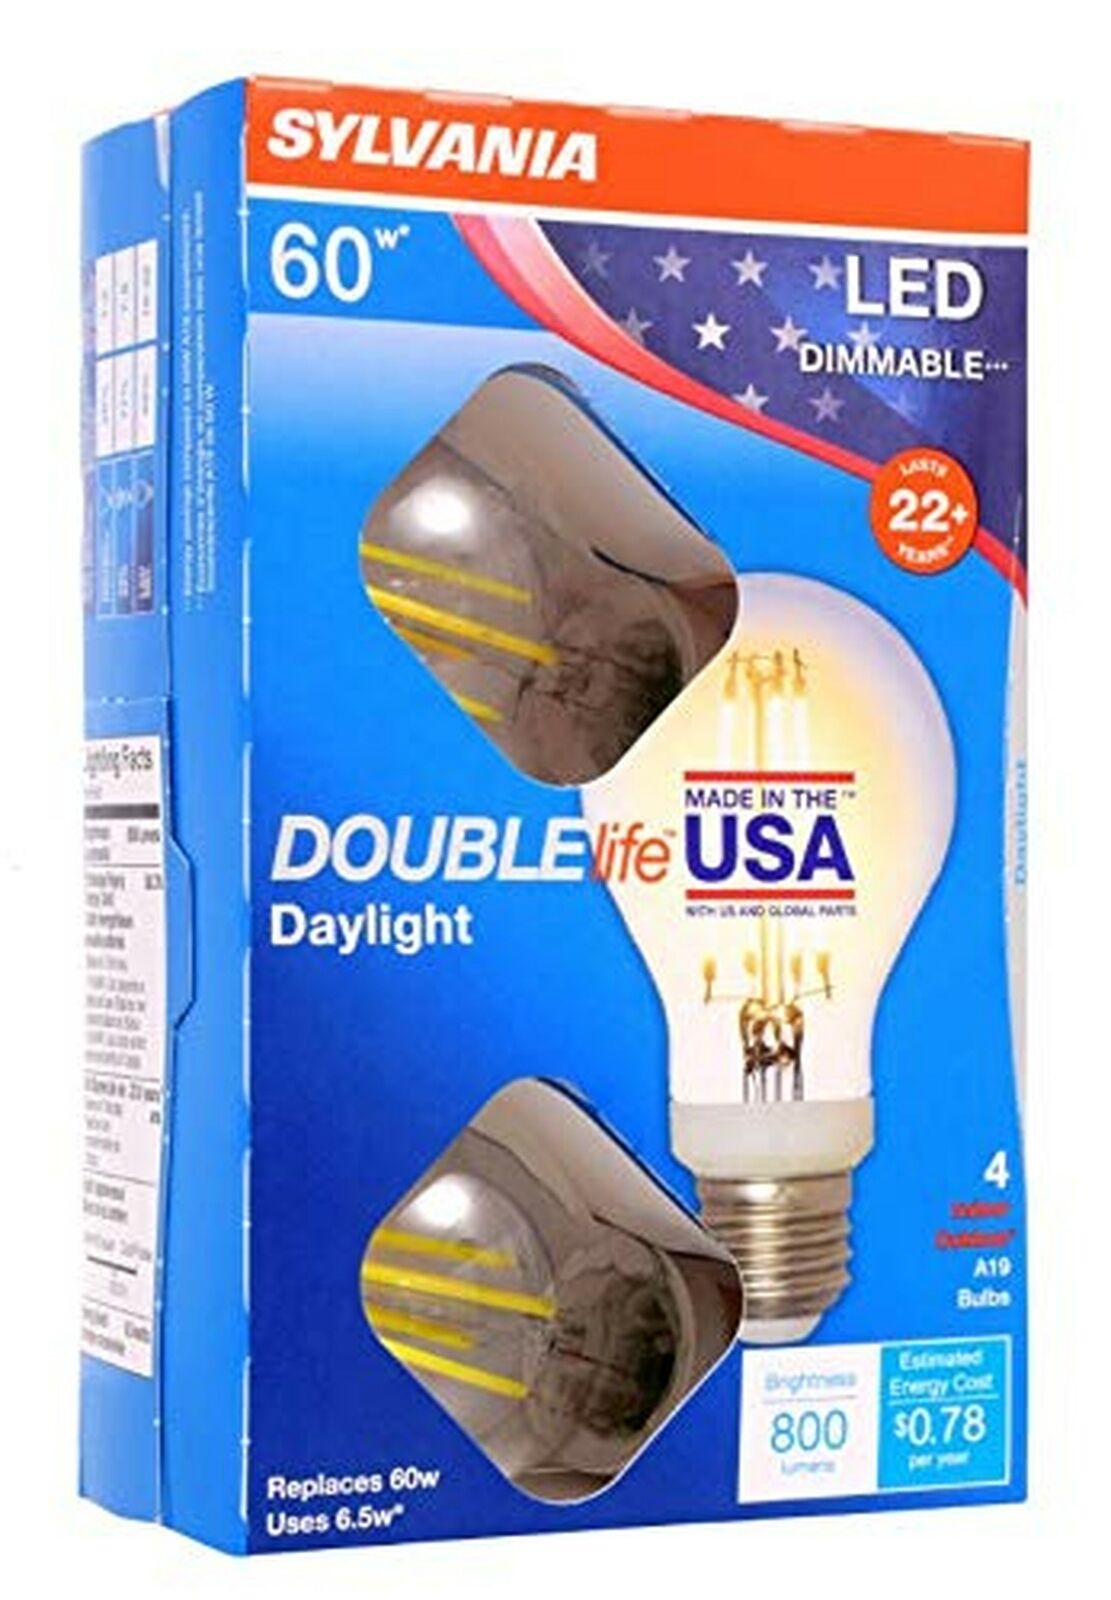 SYLVANIA Lighting, Daylight 40297 Sylvania 60 Watt Equivalent, A19 LED Light Bulbs, Dimmable, Color 5000K, Made in The USA with US and Global Parts